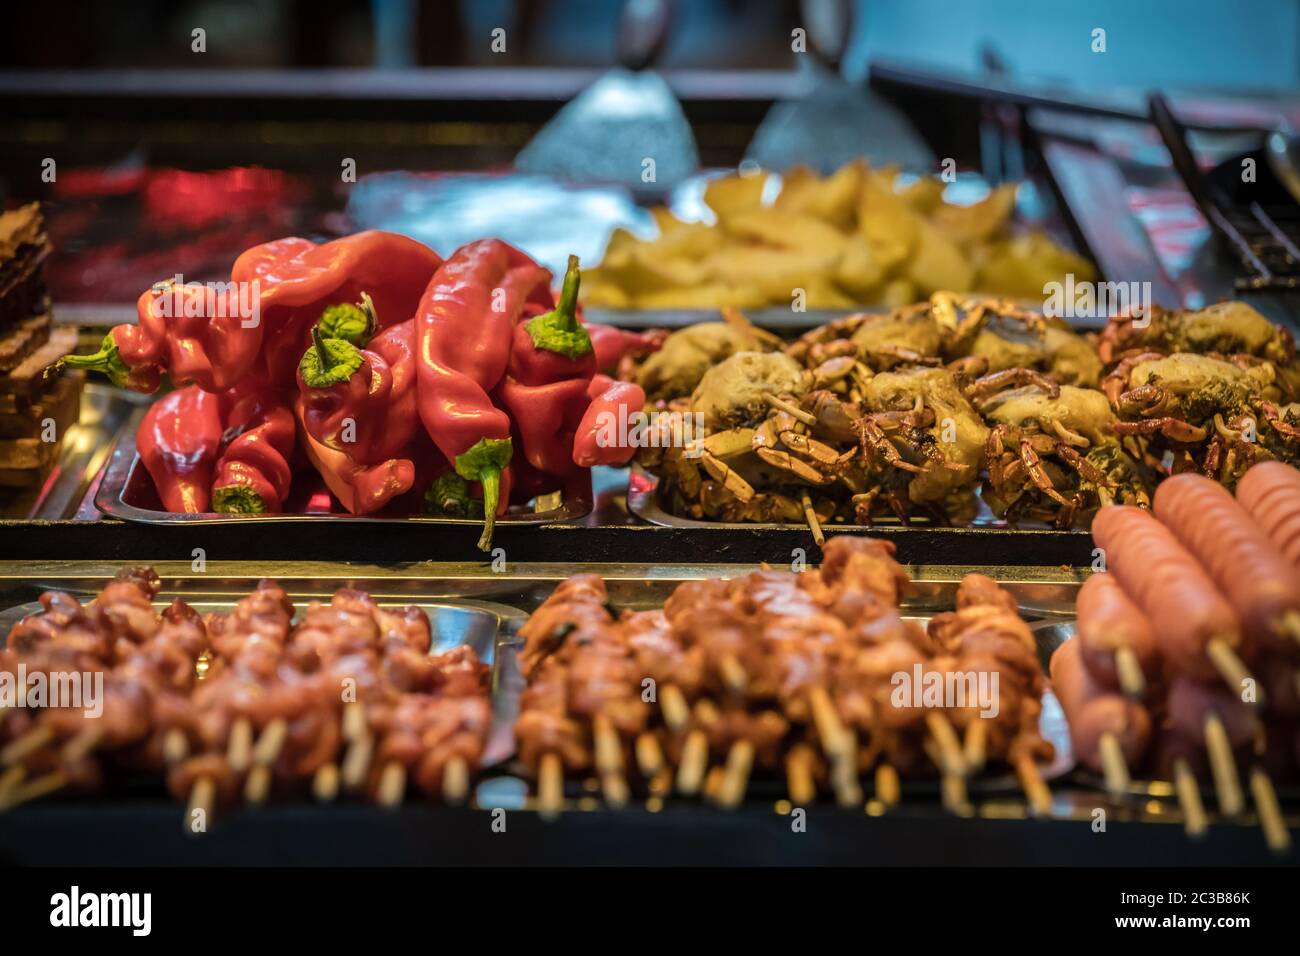 Hot buffet ingredients including peppers, crabs and sausage and meat sticks, ready to be grilled on the street in the Muslim Quarter, Xian town, China Stock Photo